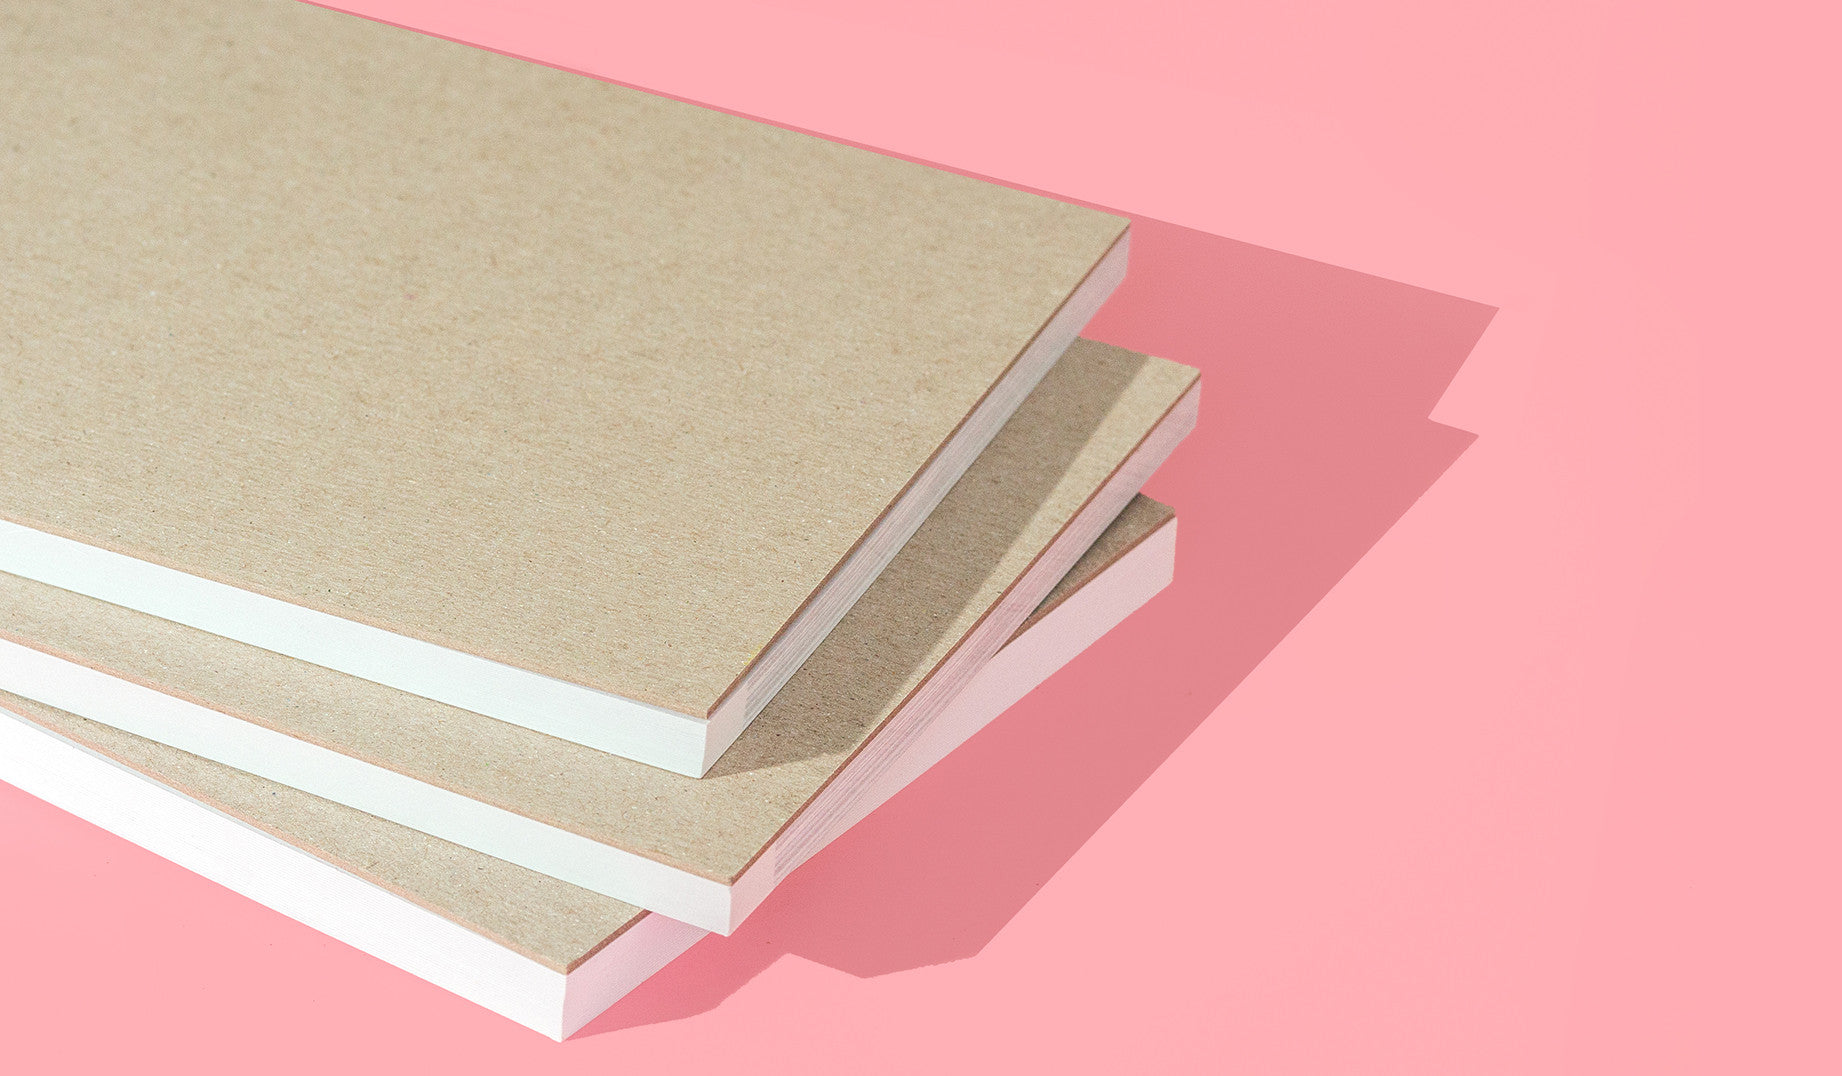 Structure is the secret to our postcard notepads. Sturdy chipboard backing adds weight and shape to these books, enhancing their overall sophisticated look.